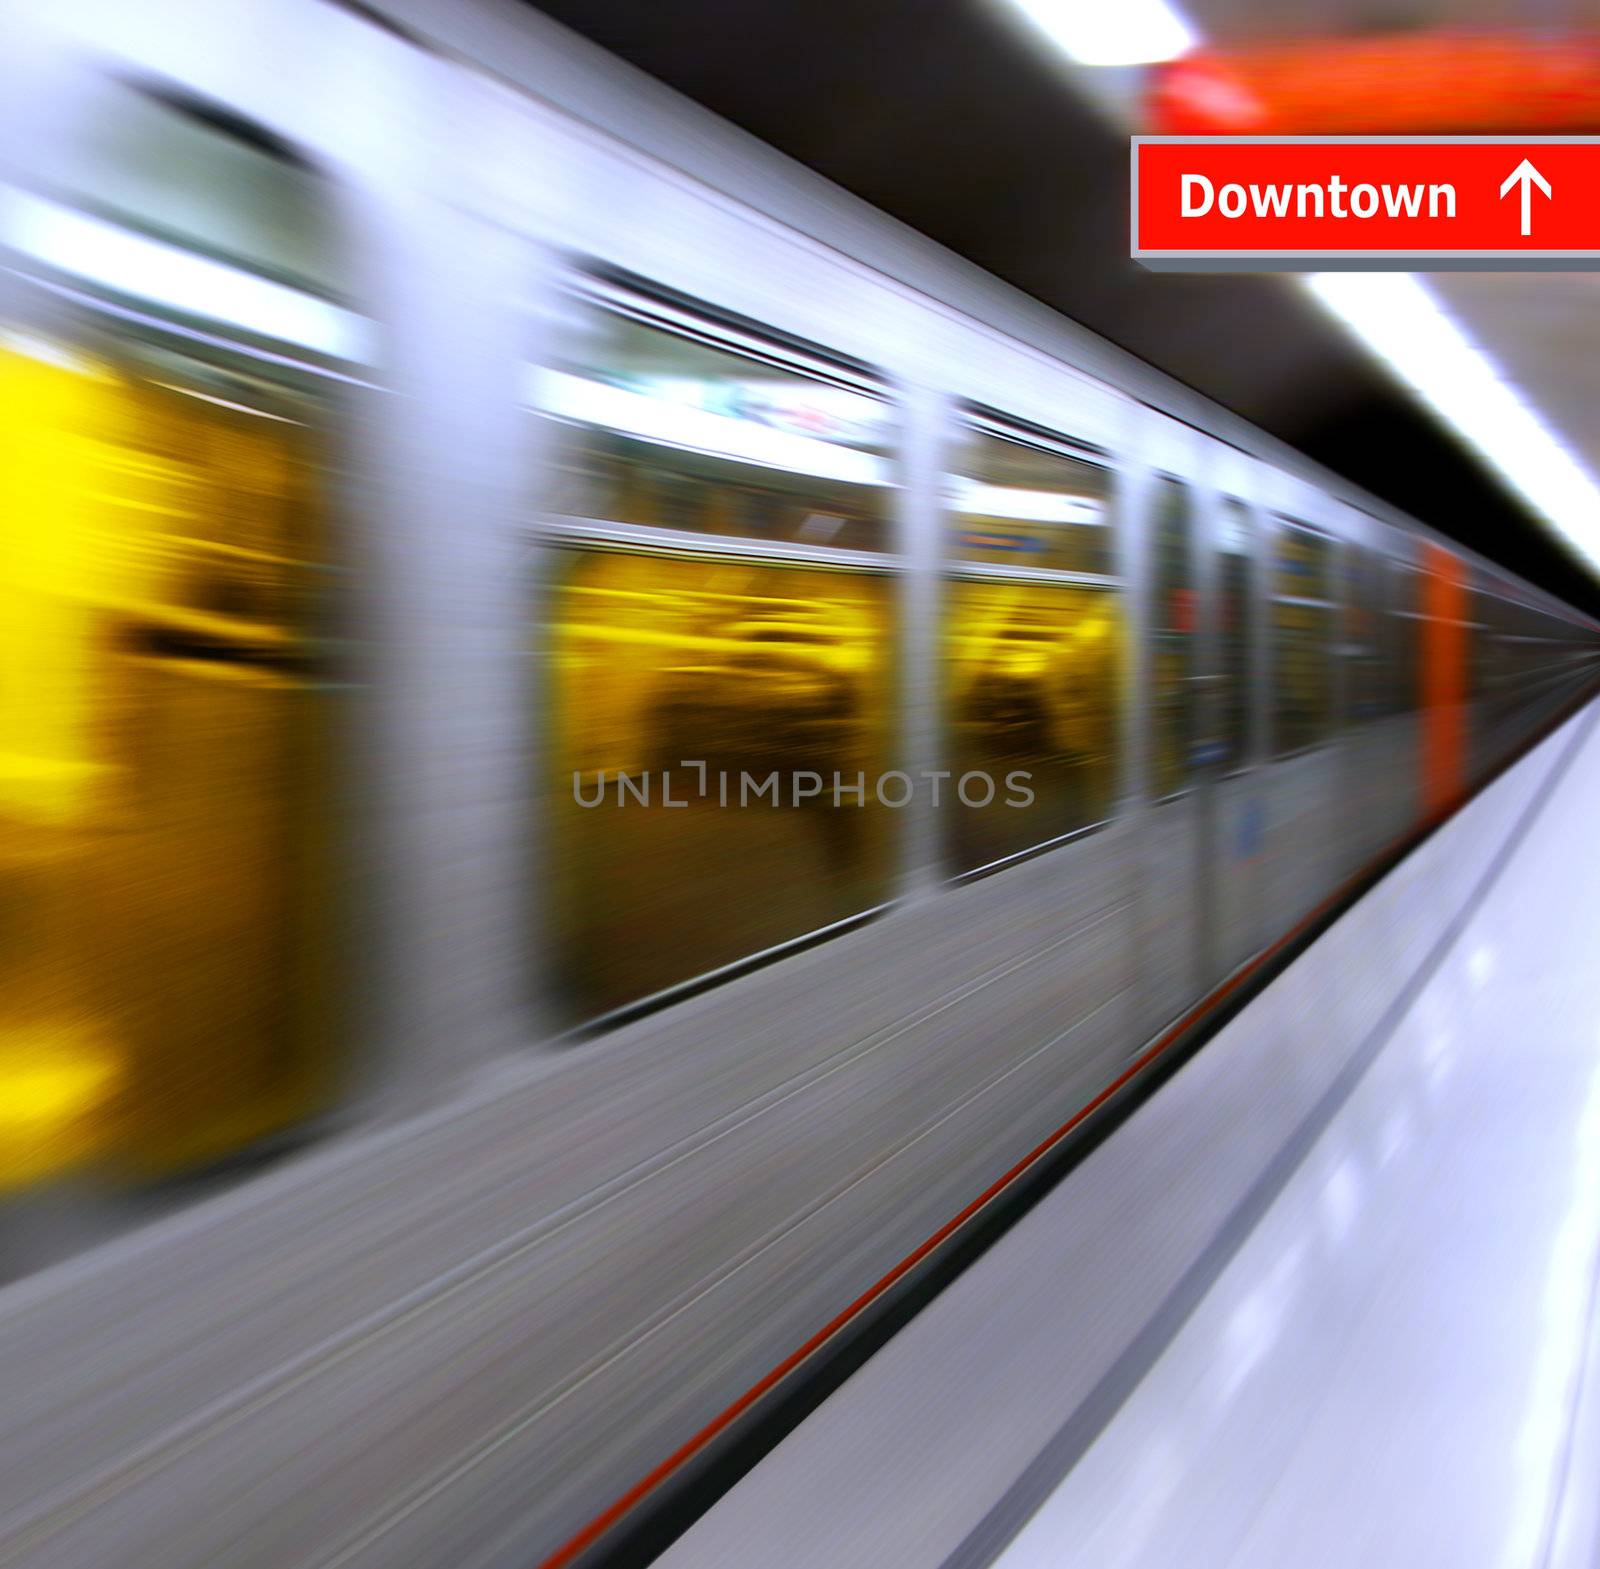 background of the high-speed train with motion blur outdoor